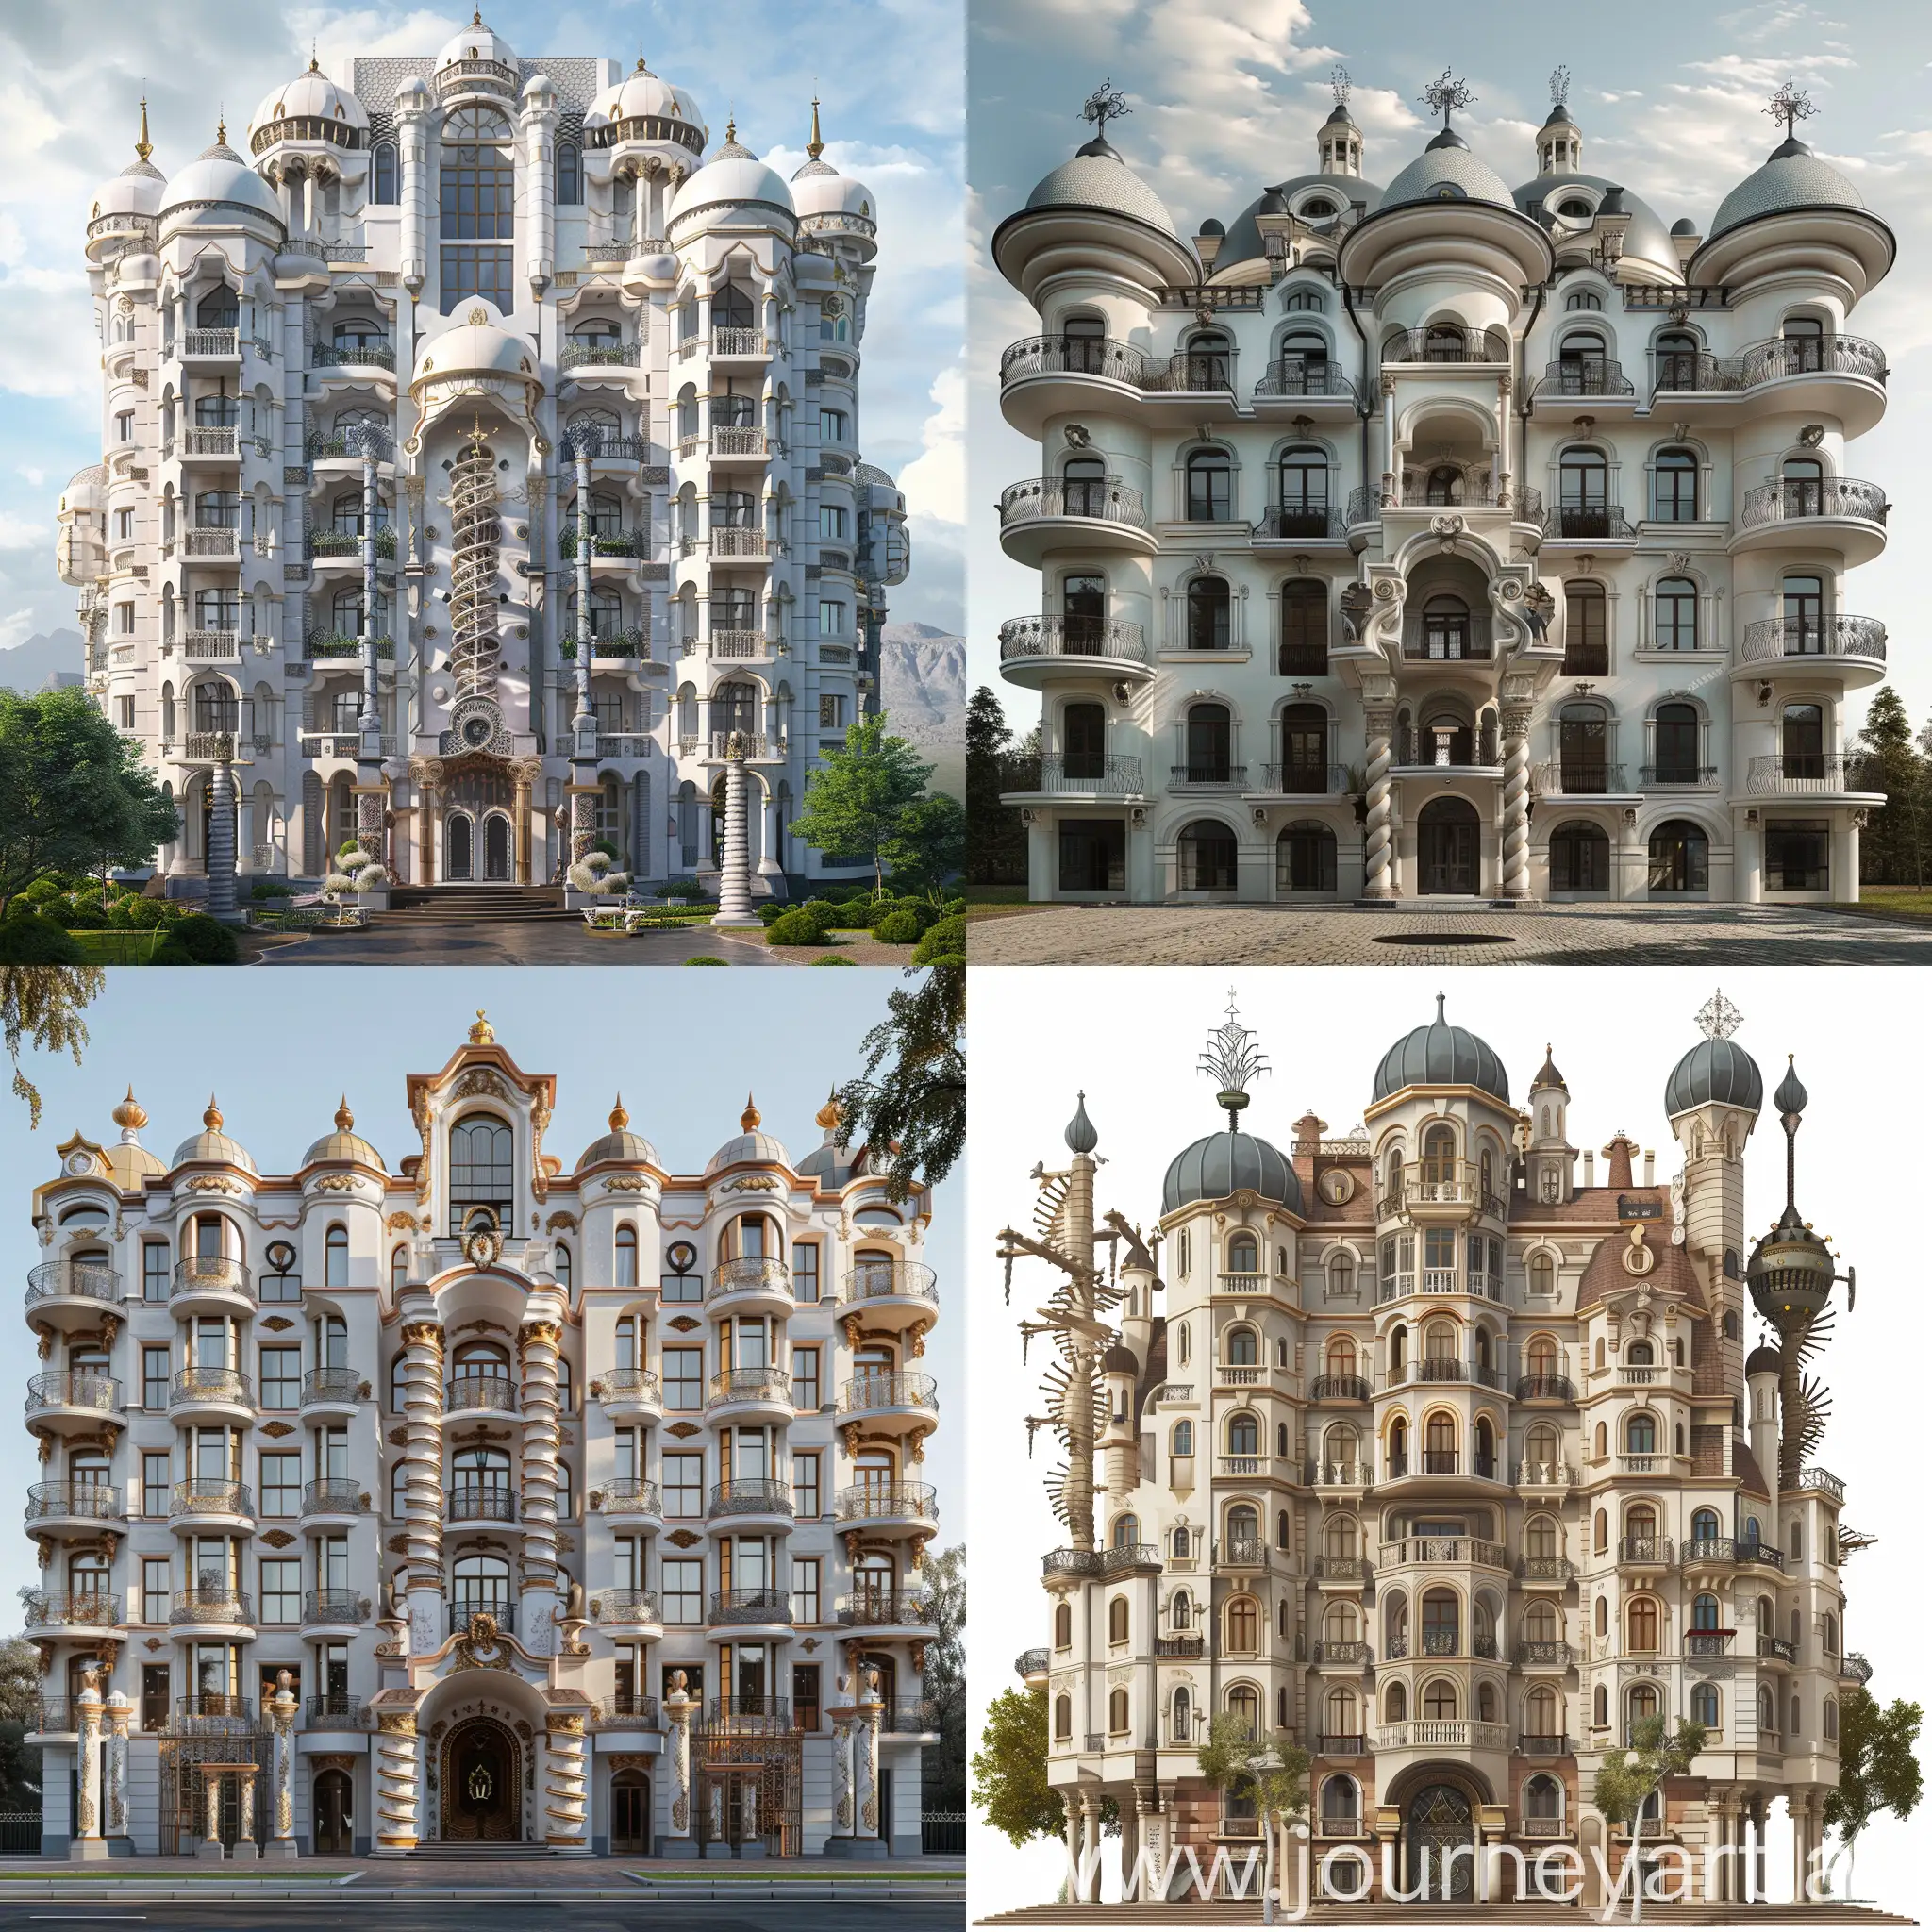 apartment building in baroque style, front portal, domes, spiral pillars, and plague pillars